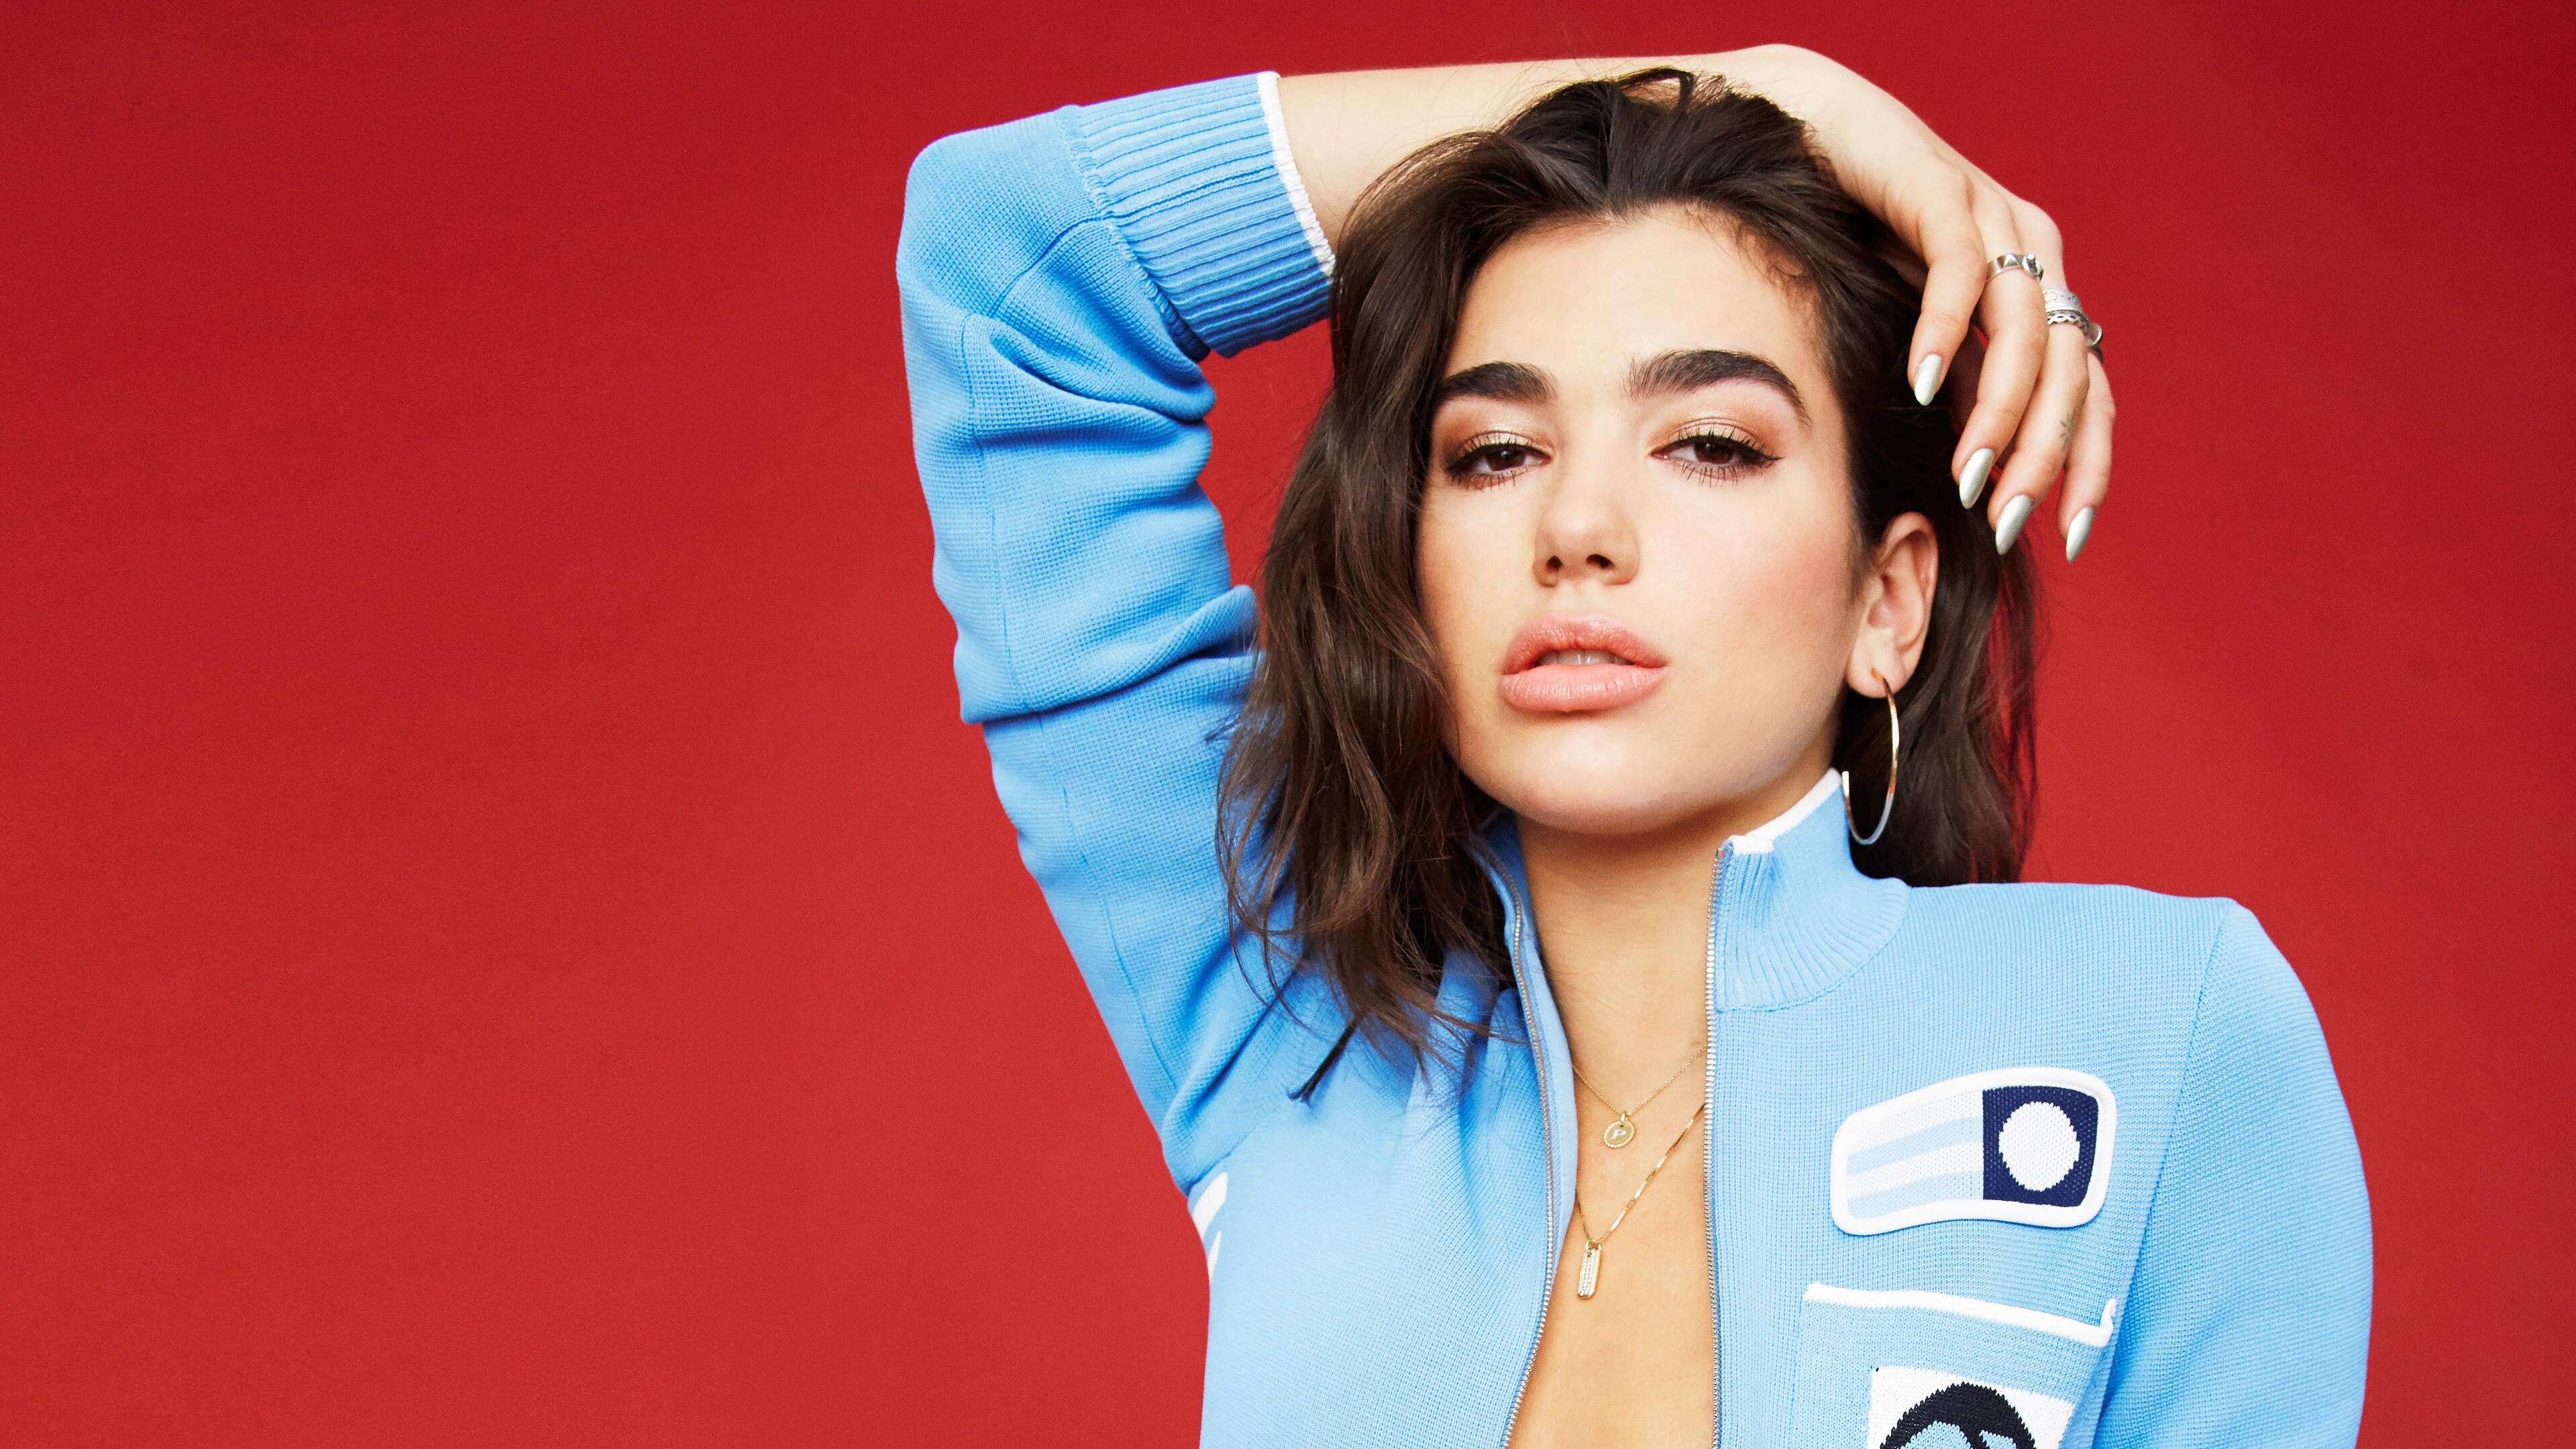 Dua Lipa: "No Lie" and "New Rules", each have over 1 billion views on YouTube. 3840x2160 4K Wallpaper.